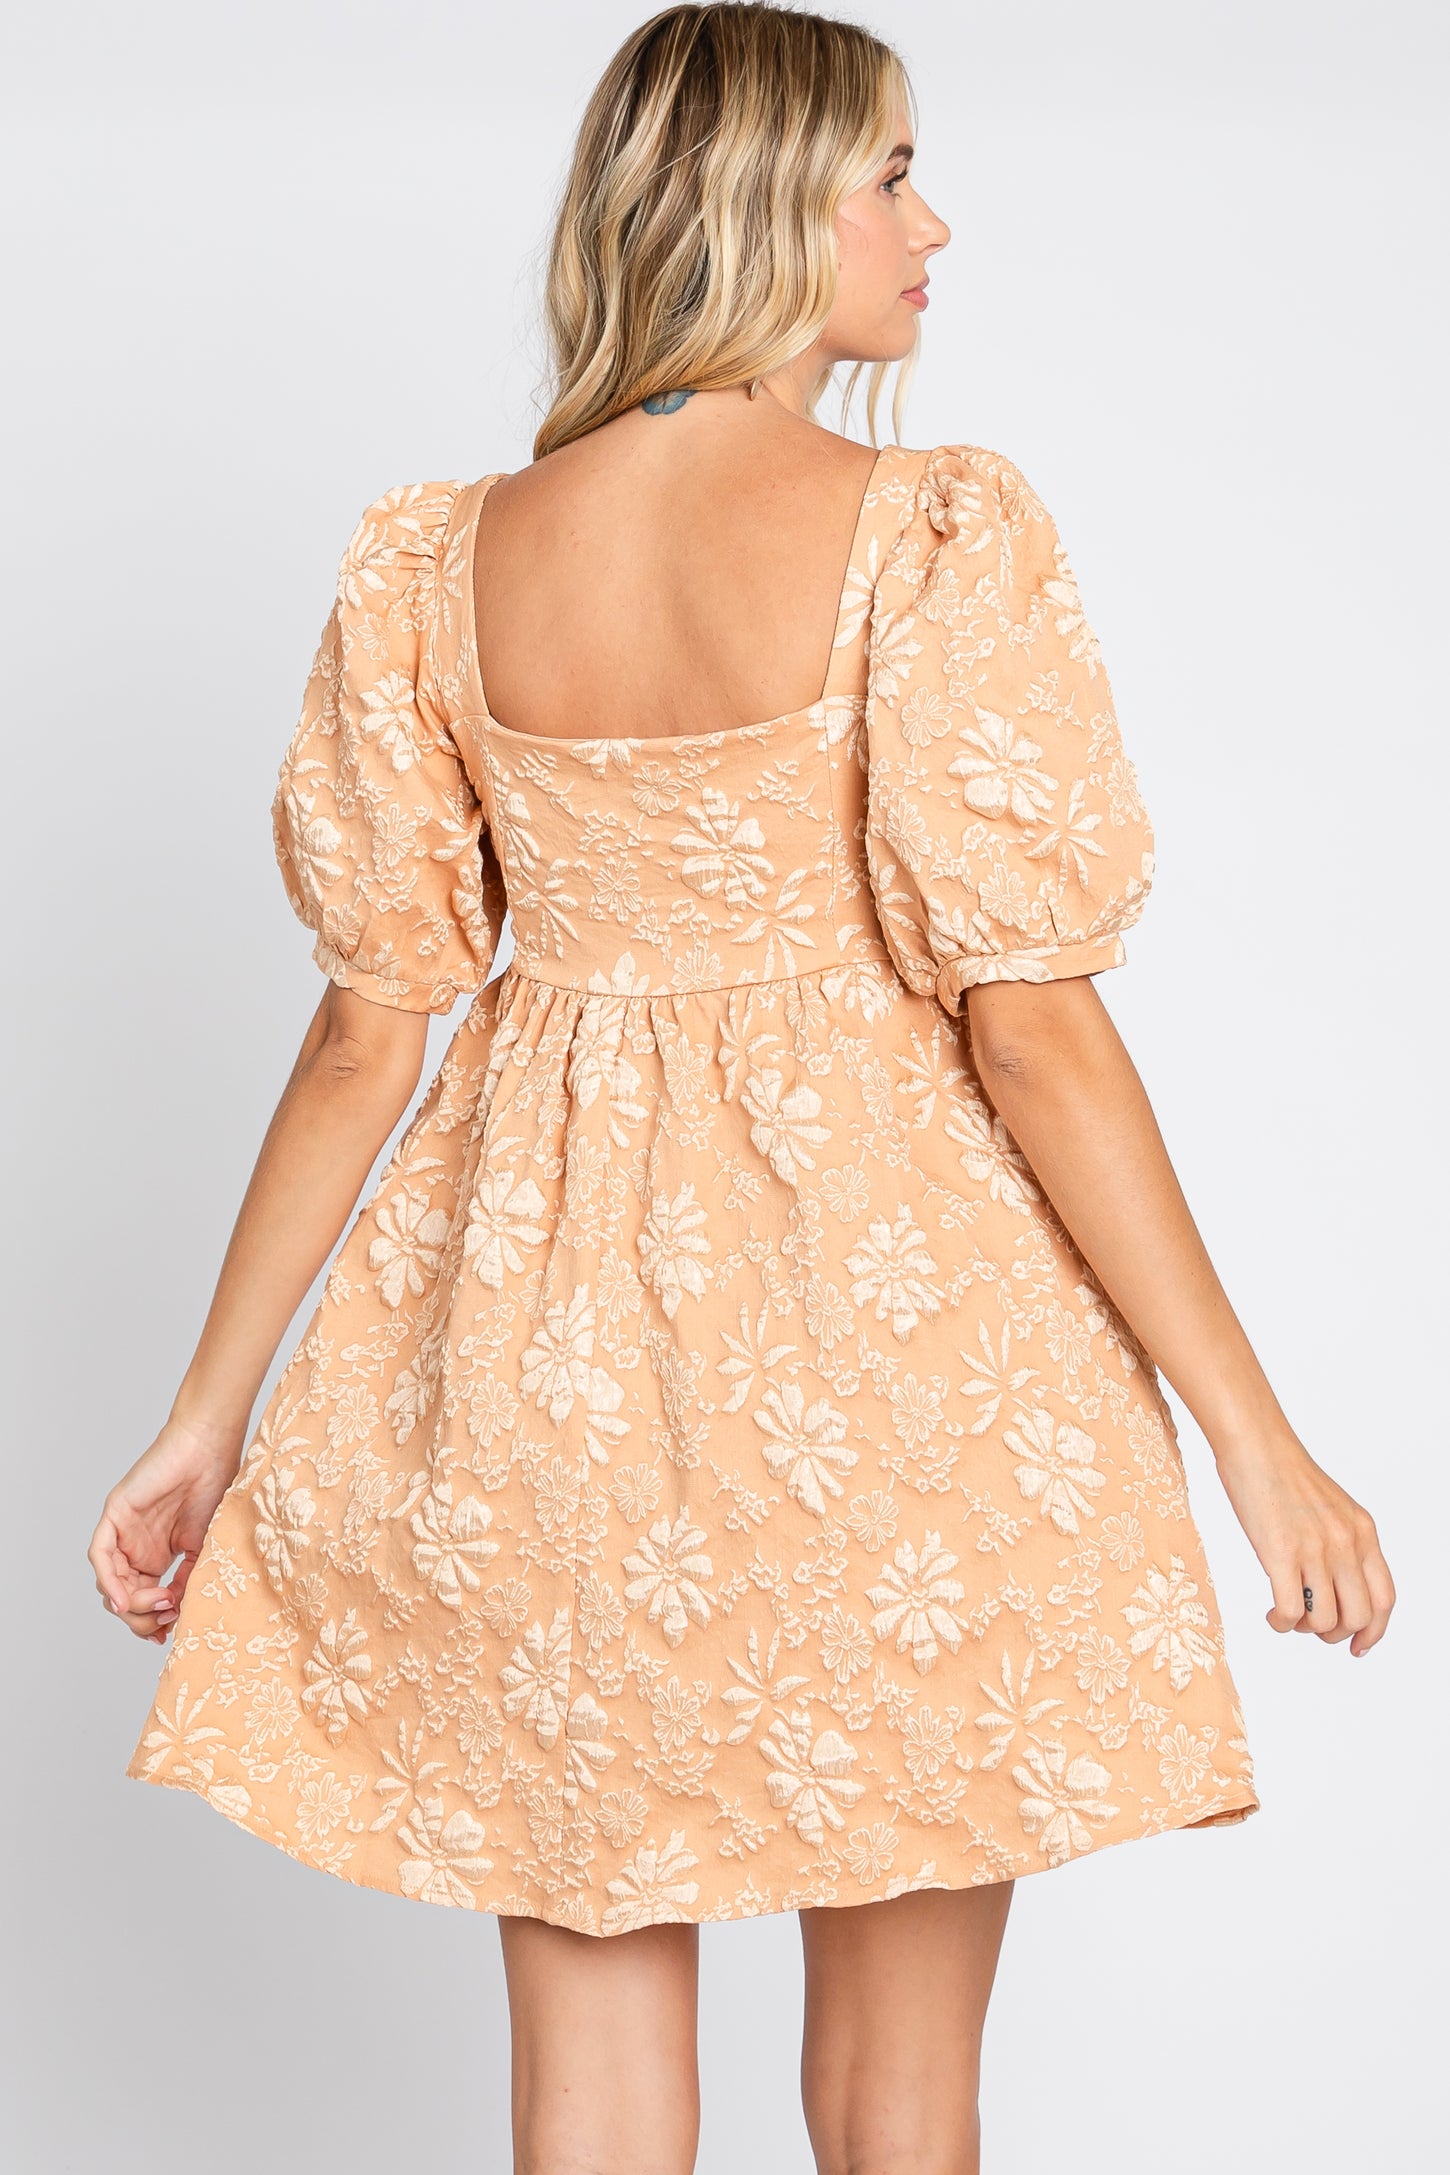 Peach Satin Floral Textured Square Neck Babydoll Dress